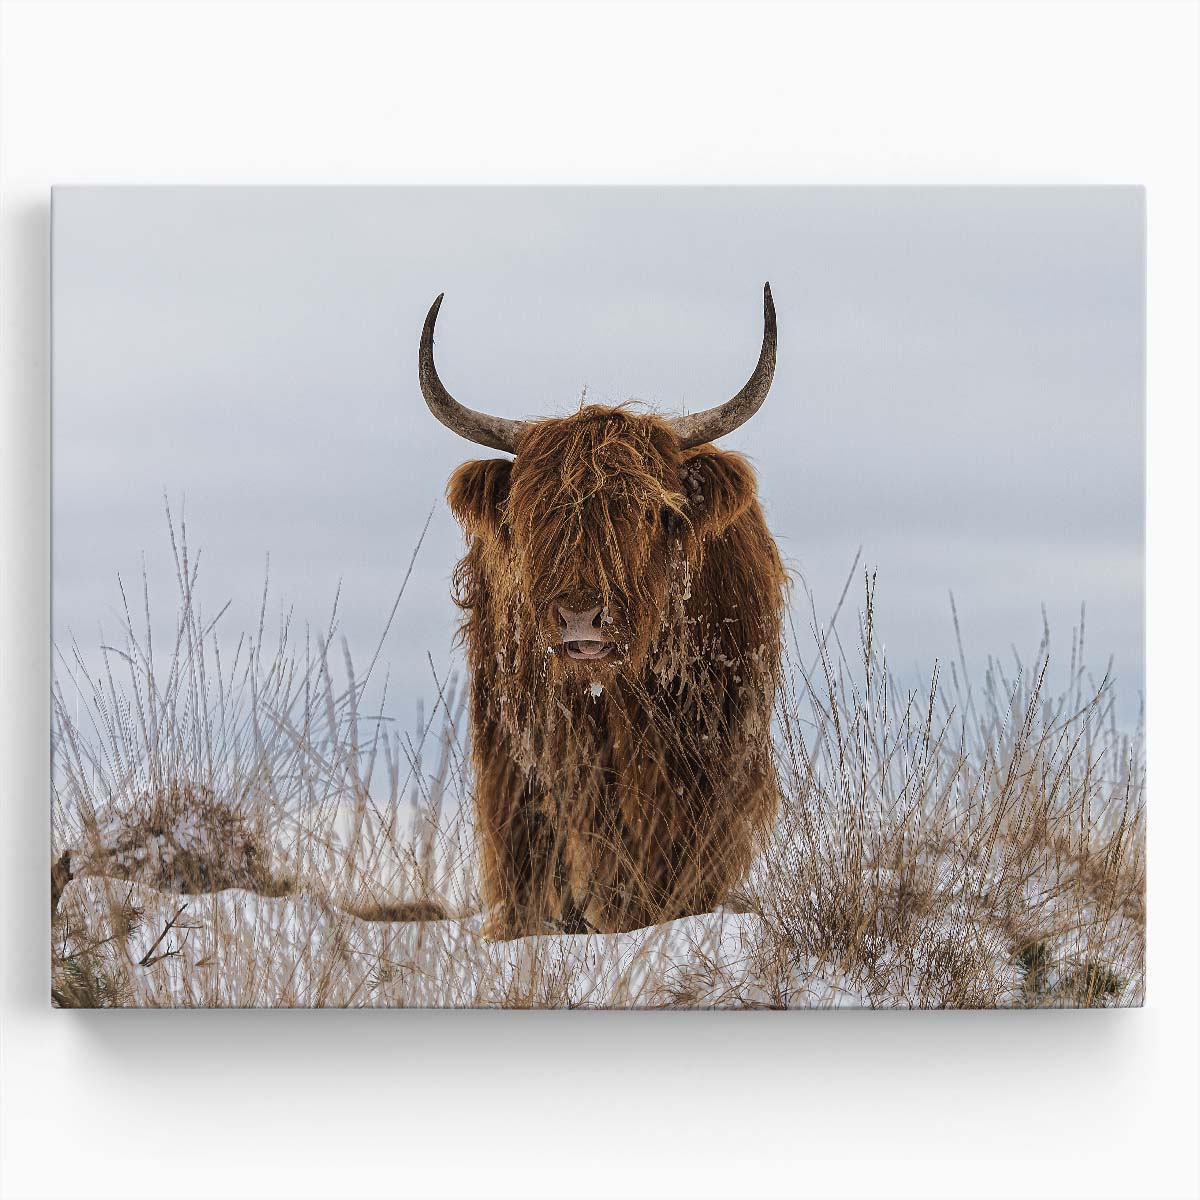 Frosty Highland Cow in Snowy Veluwe Wall Art by Luxuriance Designs. Made in USA.